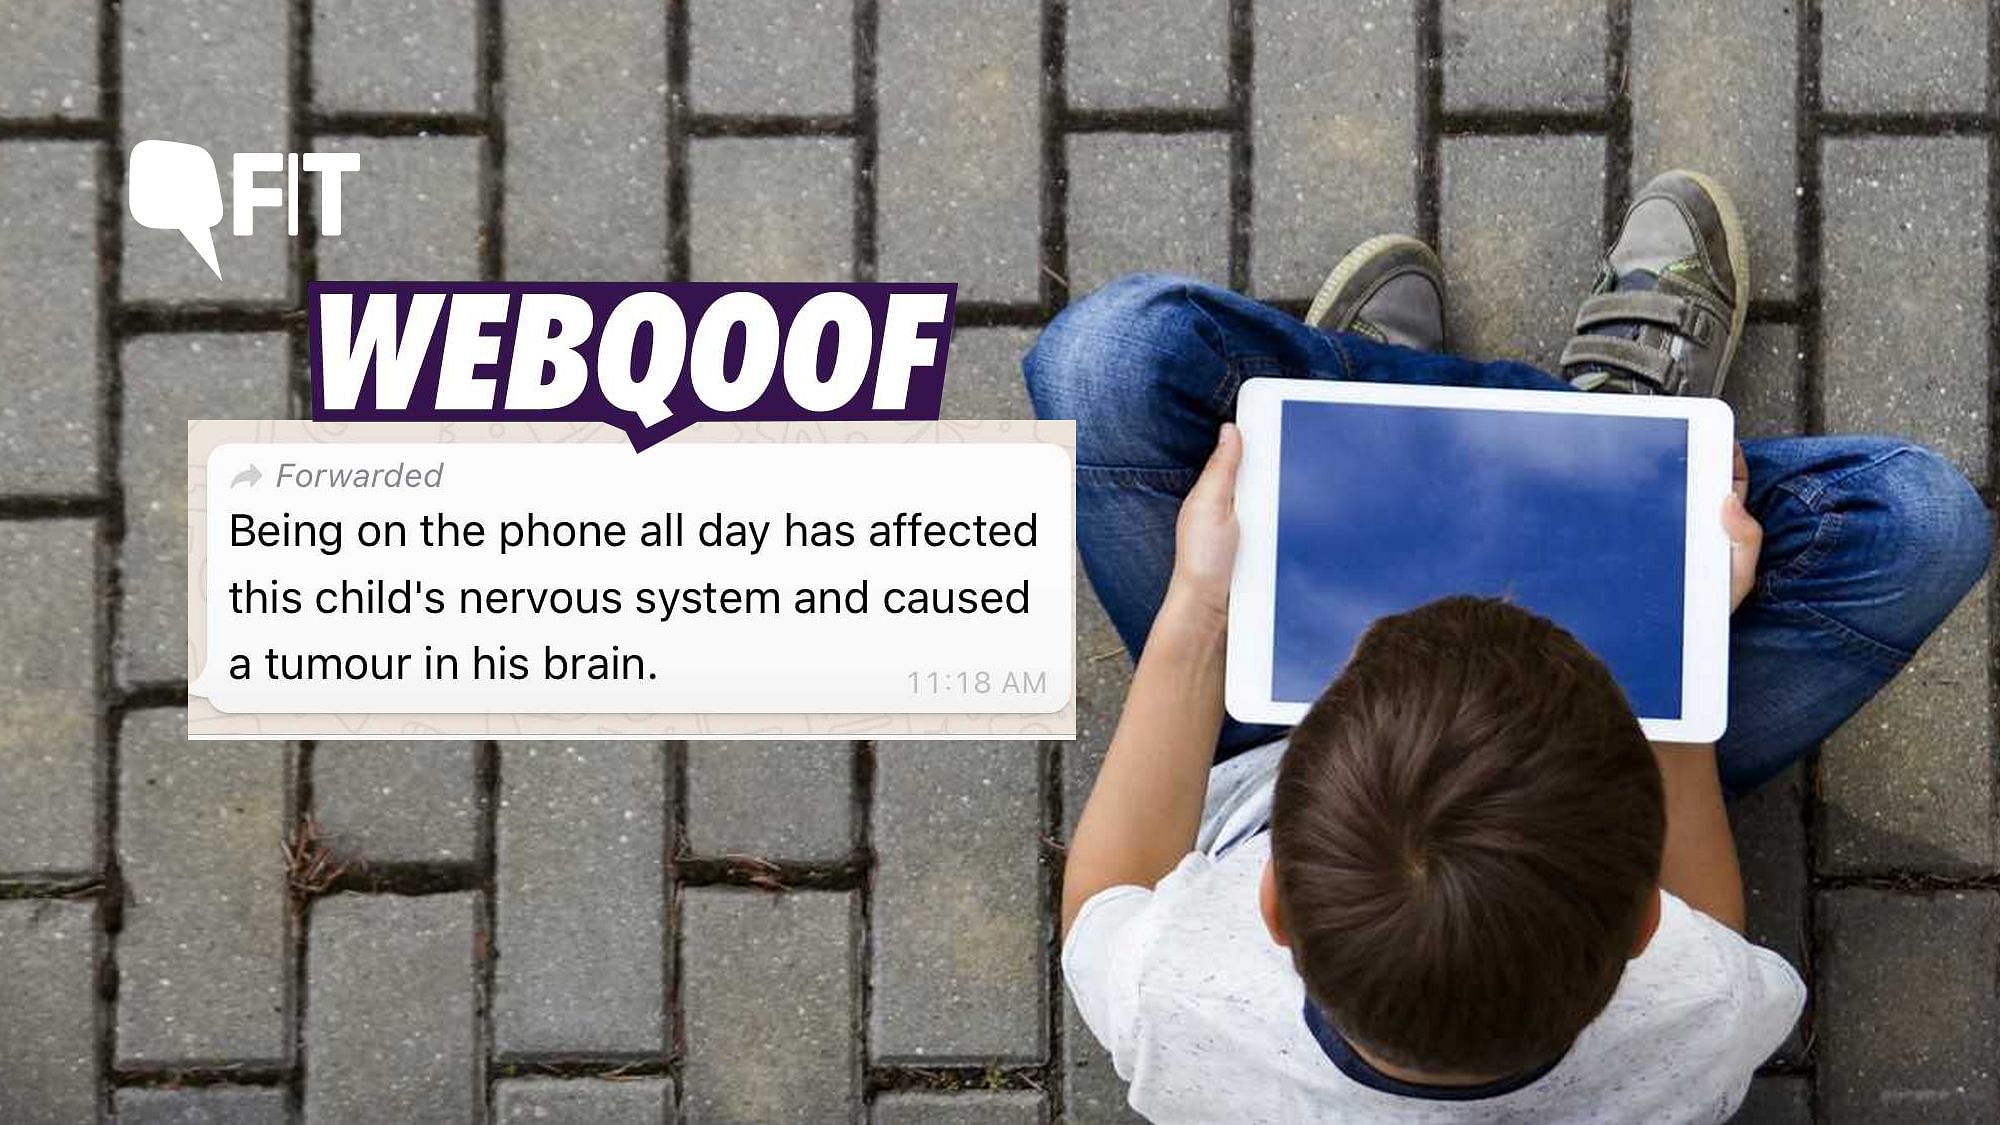 A viral message claims that a child got a tumor in his brain because of exposure to mobile phones.